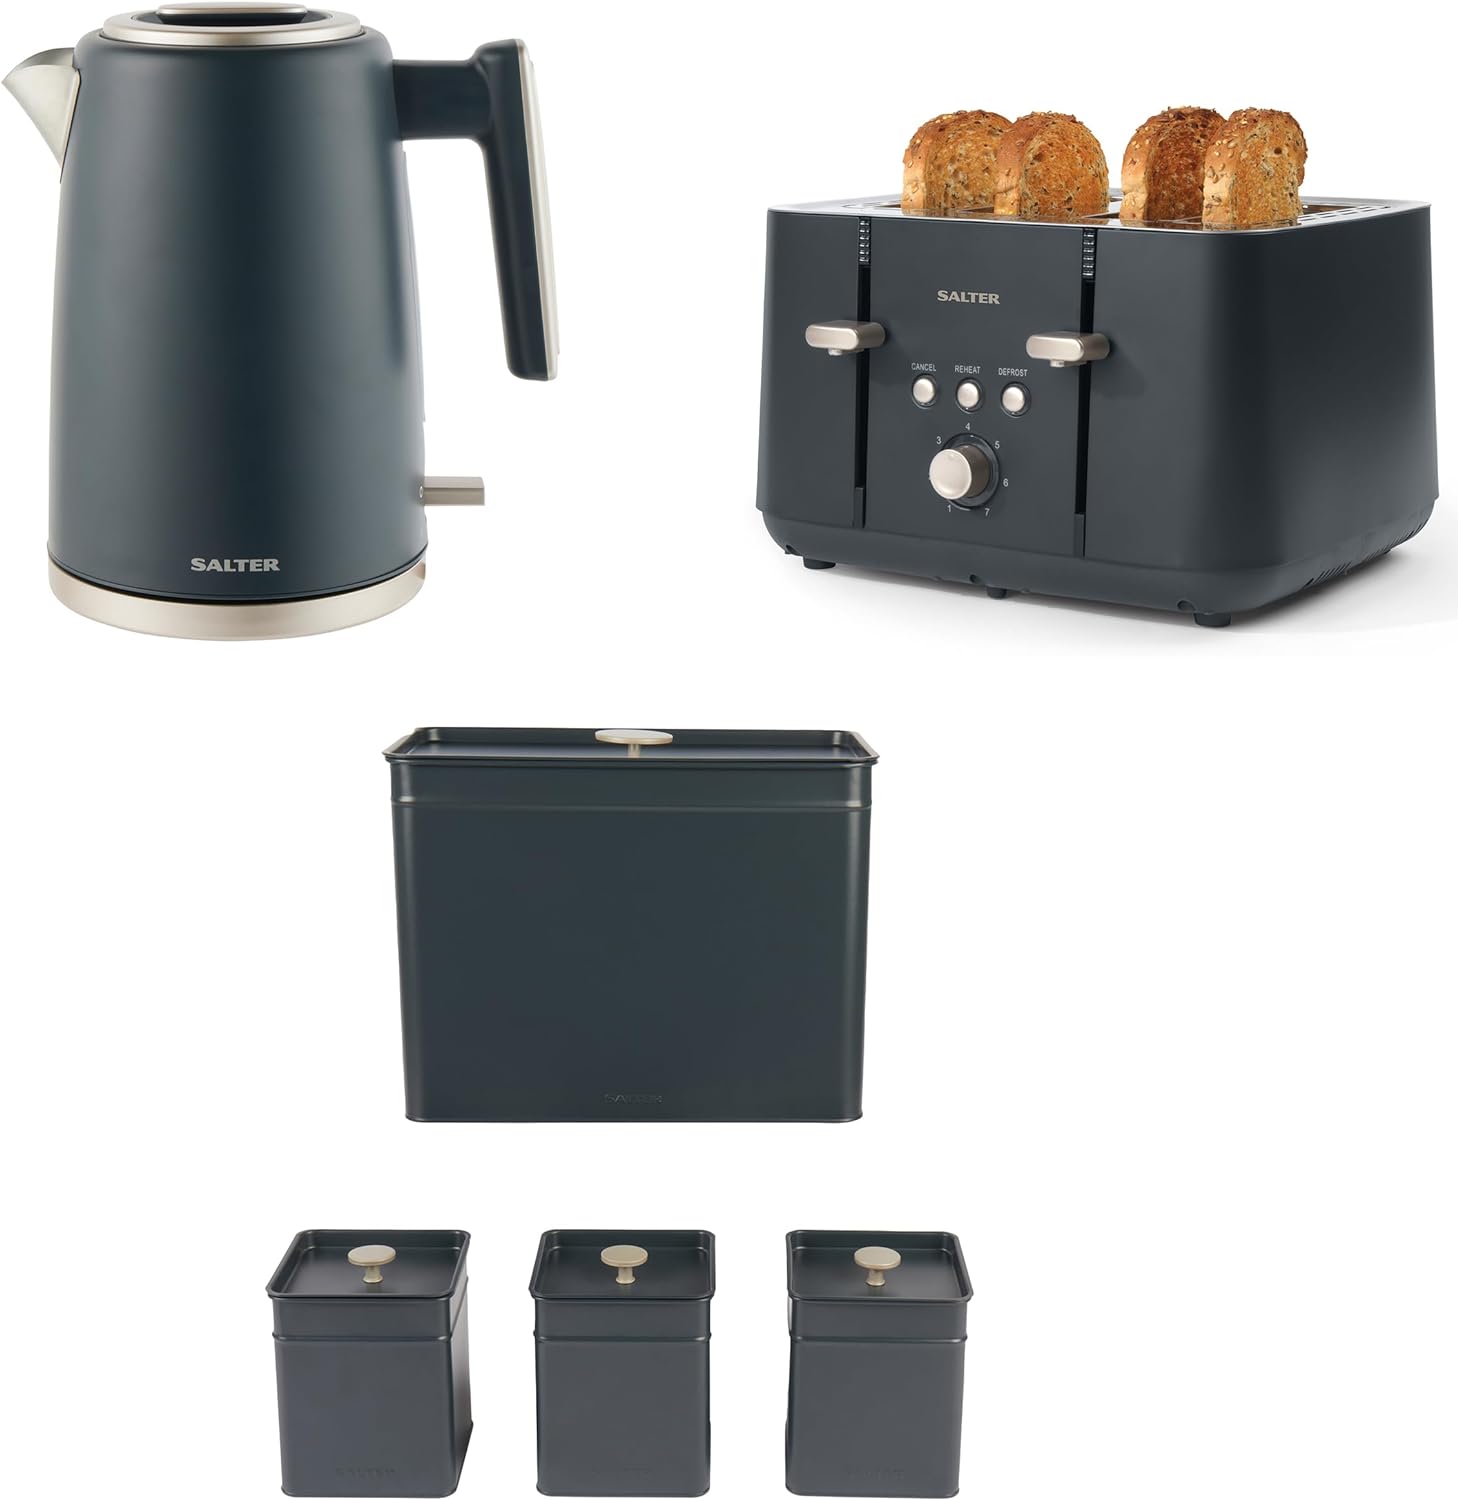 Salter COMBO - 8687 Kettle Toaster Microwave Set – Matching Kitchen Countertop Breakfast Set, Rapid Boil 1.7L 3kW Kettle, 4 - Slice Anti - Jamming Toaster, 20L 800W Manual Dial Microwave, Marino, Blue Grey - Amazing Gadgets Outlet